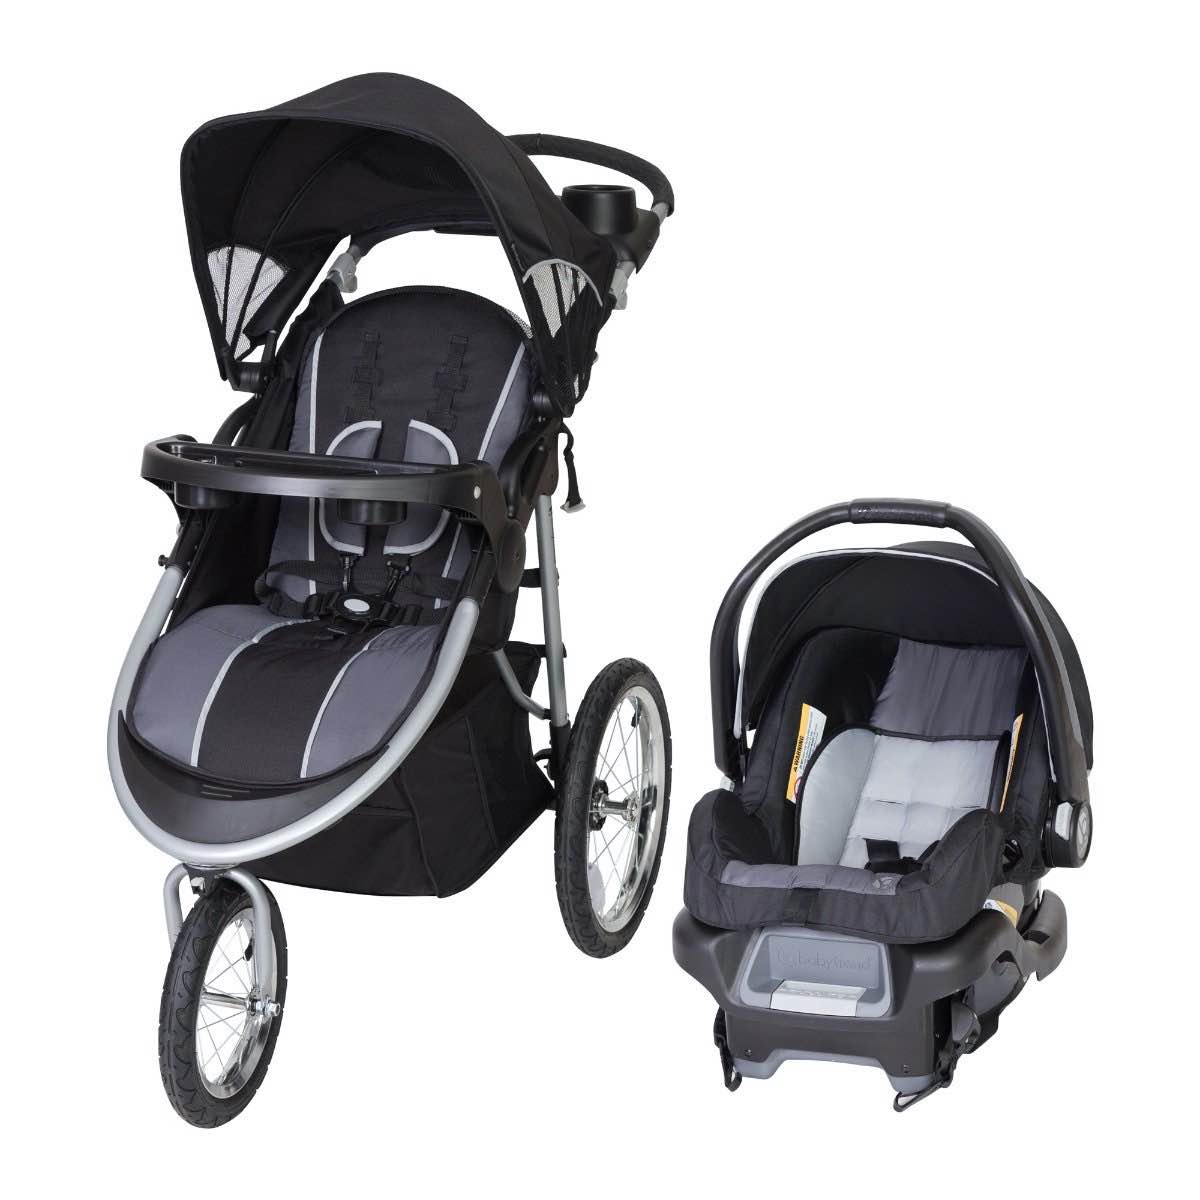 New BabyTrend Pathway 35 Jogger Travel System (Optic Grey)